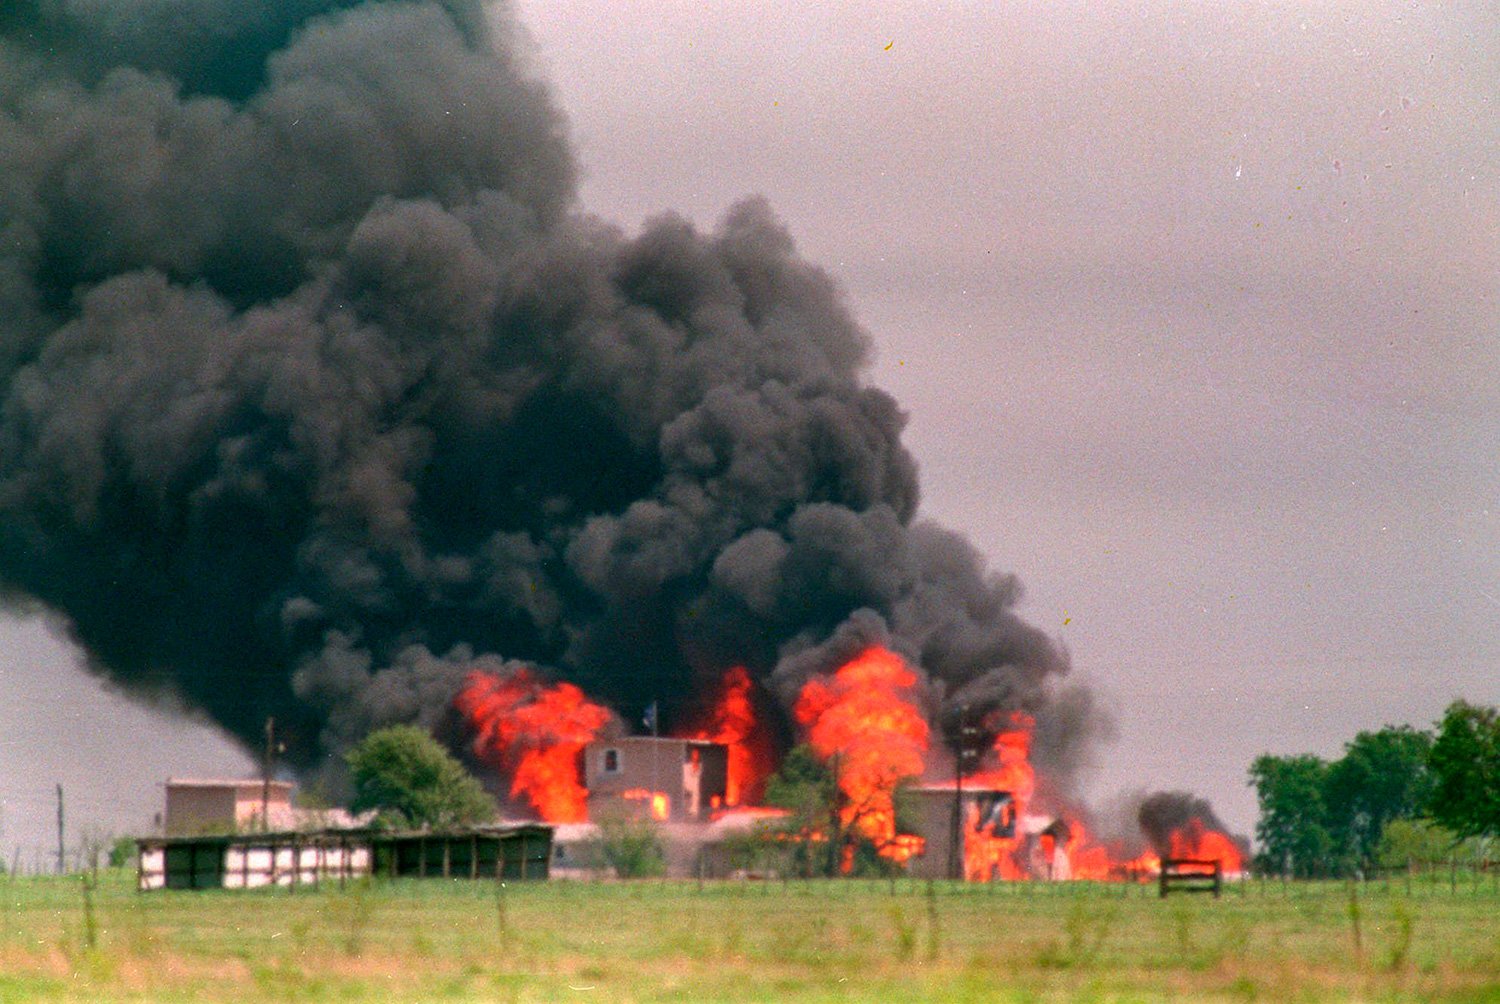  Flames engulf the Branch Davidian compound April 19, 1993 in Waco, Texas.  Eighty-one Davidians, including leader David Koresh, perished as federal agents tried to drive them out of the compound. (AP Photo/Susan Weems) 